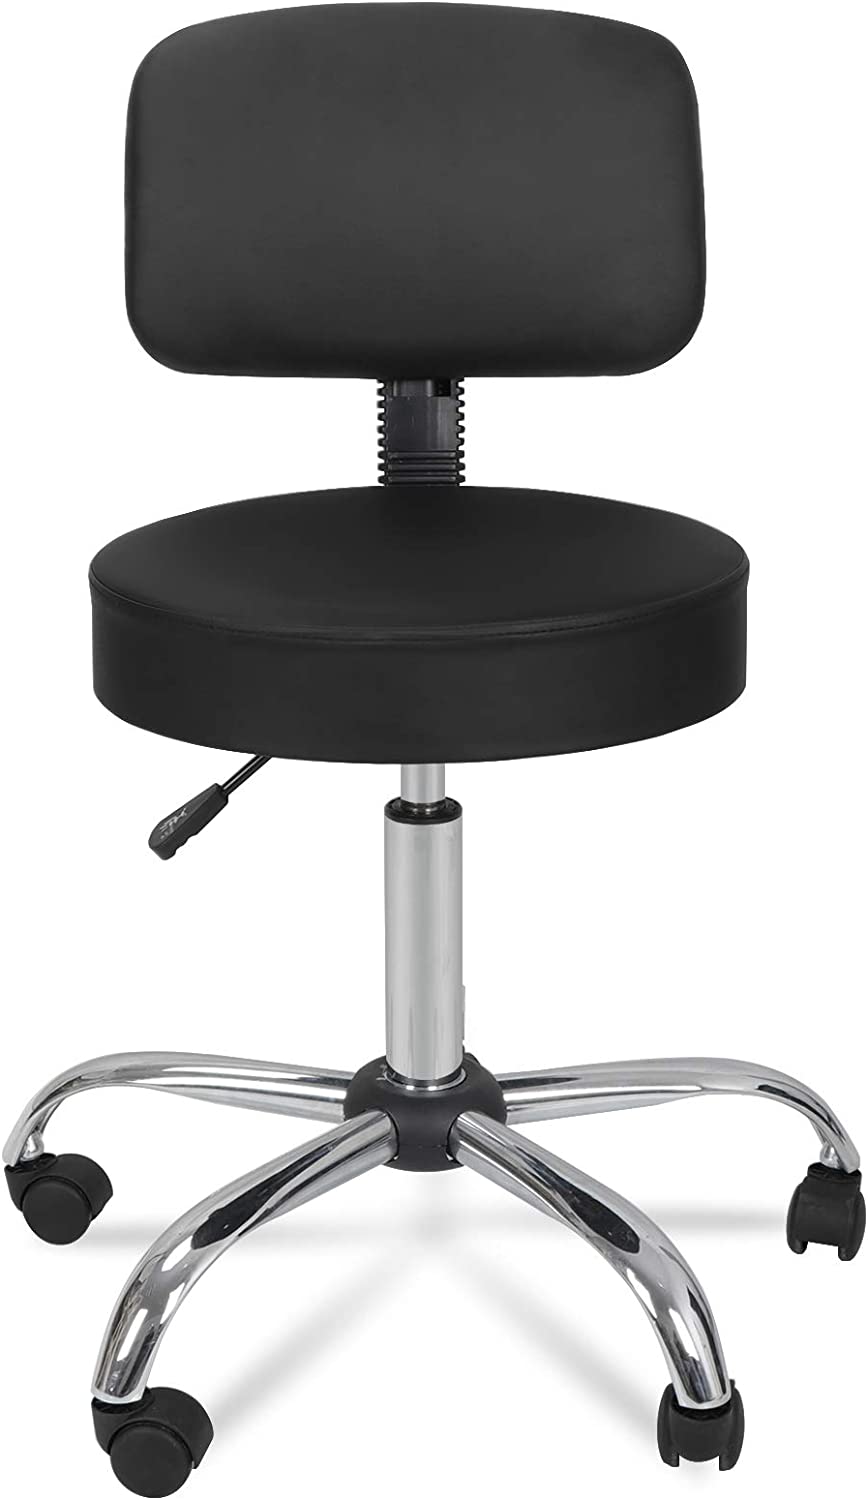 Swivel Salon Spa Stool Chair with Back Support Adjustable Hydraulic Rolling Stool Office Stool with Back for Beauty Barber Tattoo Massage Drafting Medical,Black